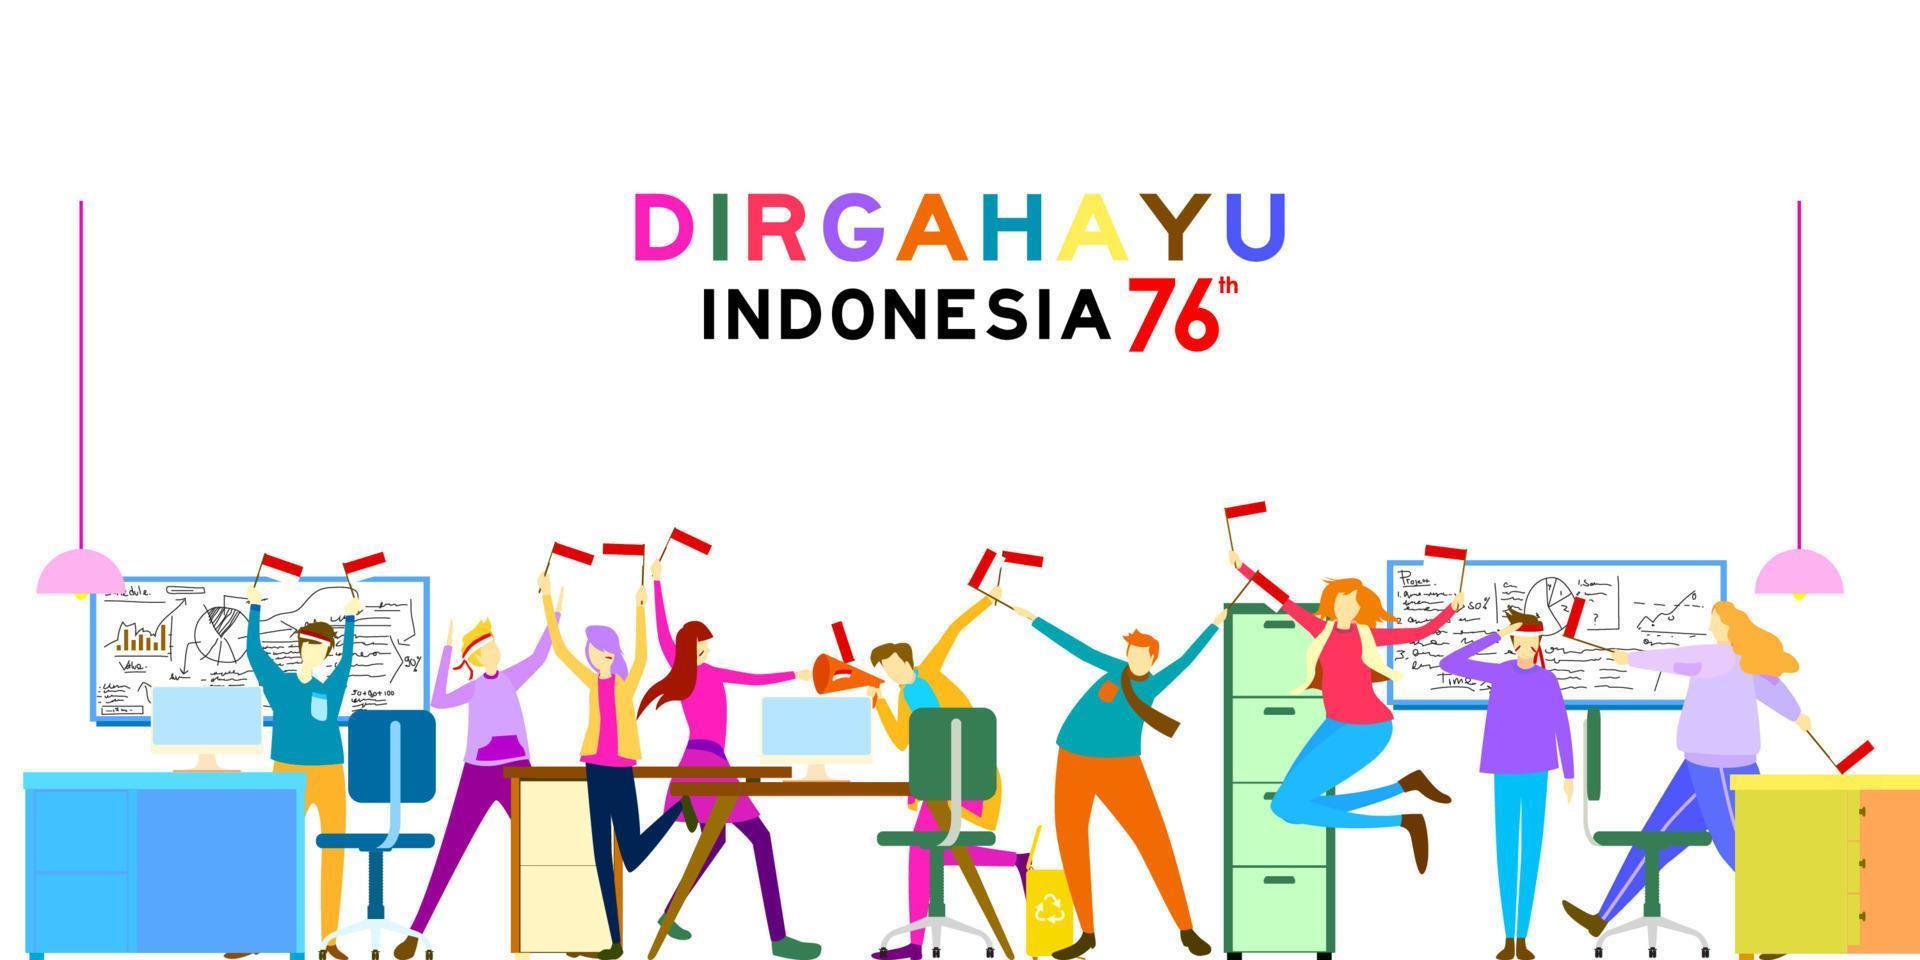 Indonesia independence day greeting card with spirit young people concept illustration. 76 tahun kemerdekaan indonesia translates to 76 years Indonesia independence day. vector